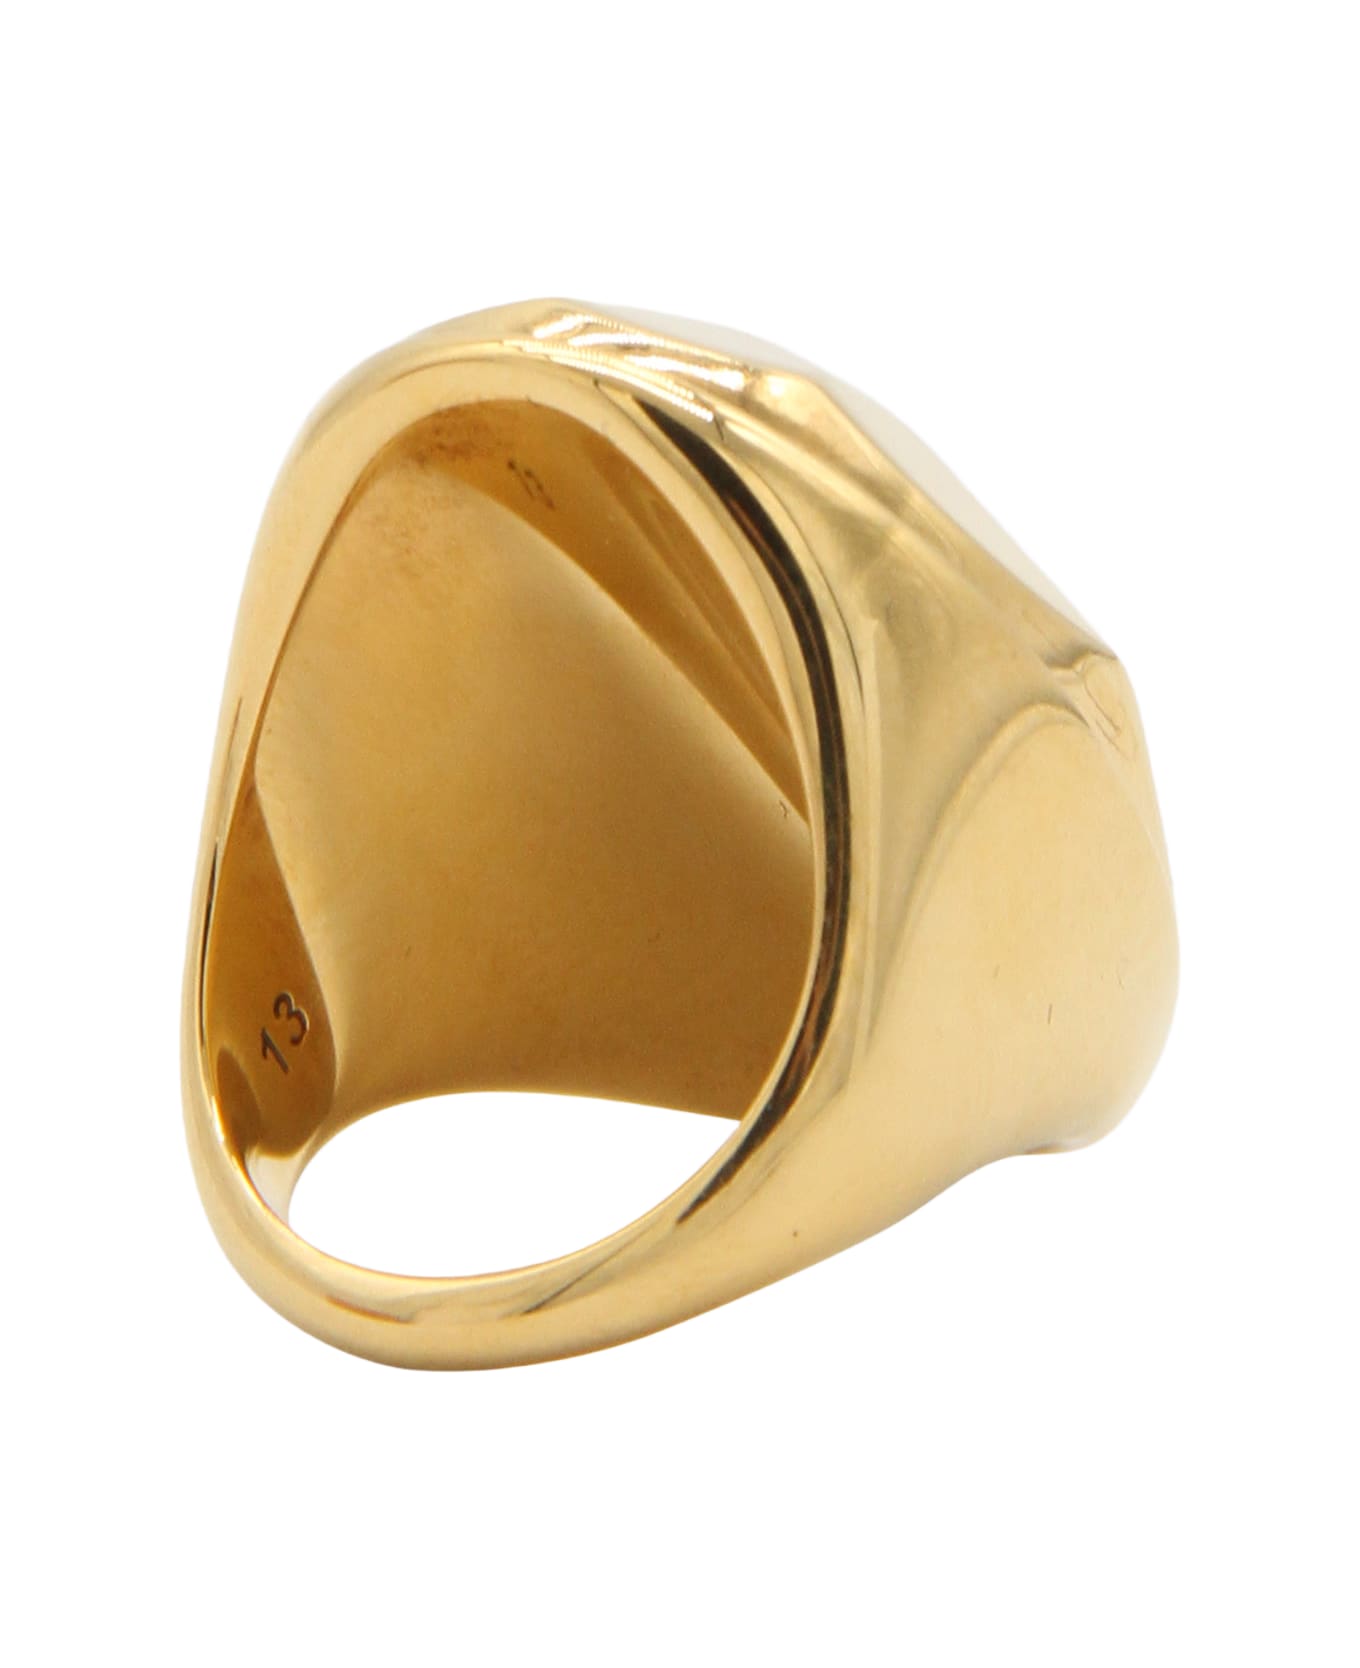 Alexander McQueen Antique Gold Metal The Faceted Stone Ring - Golden リング